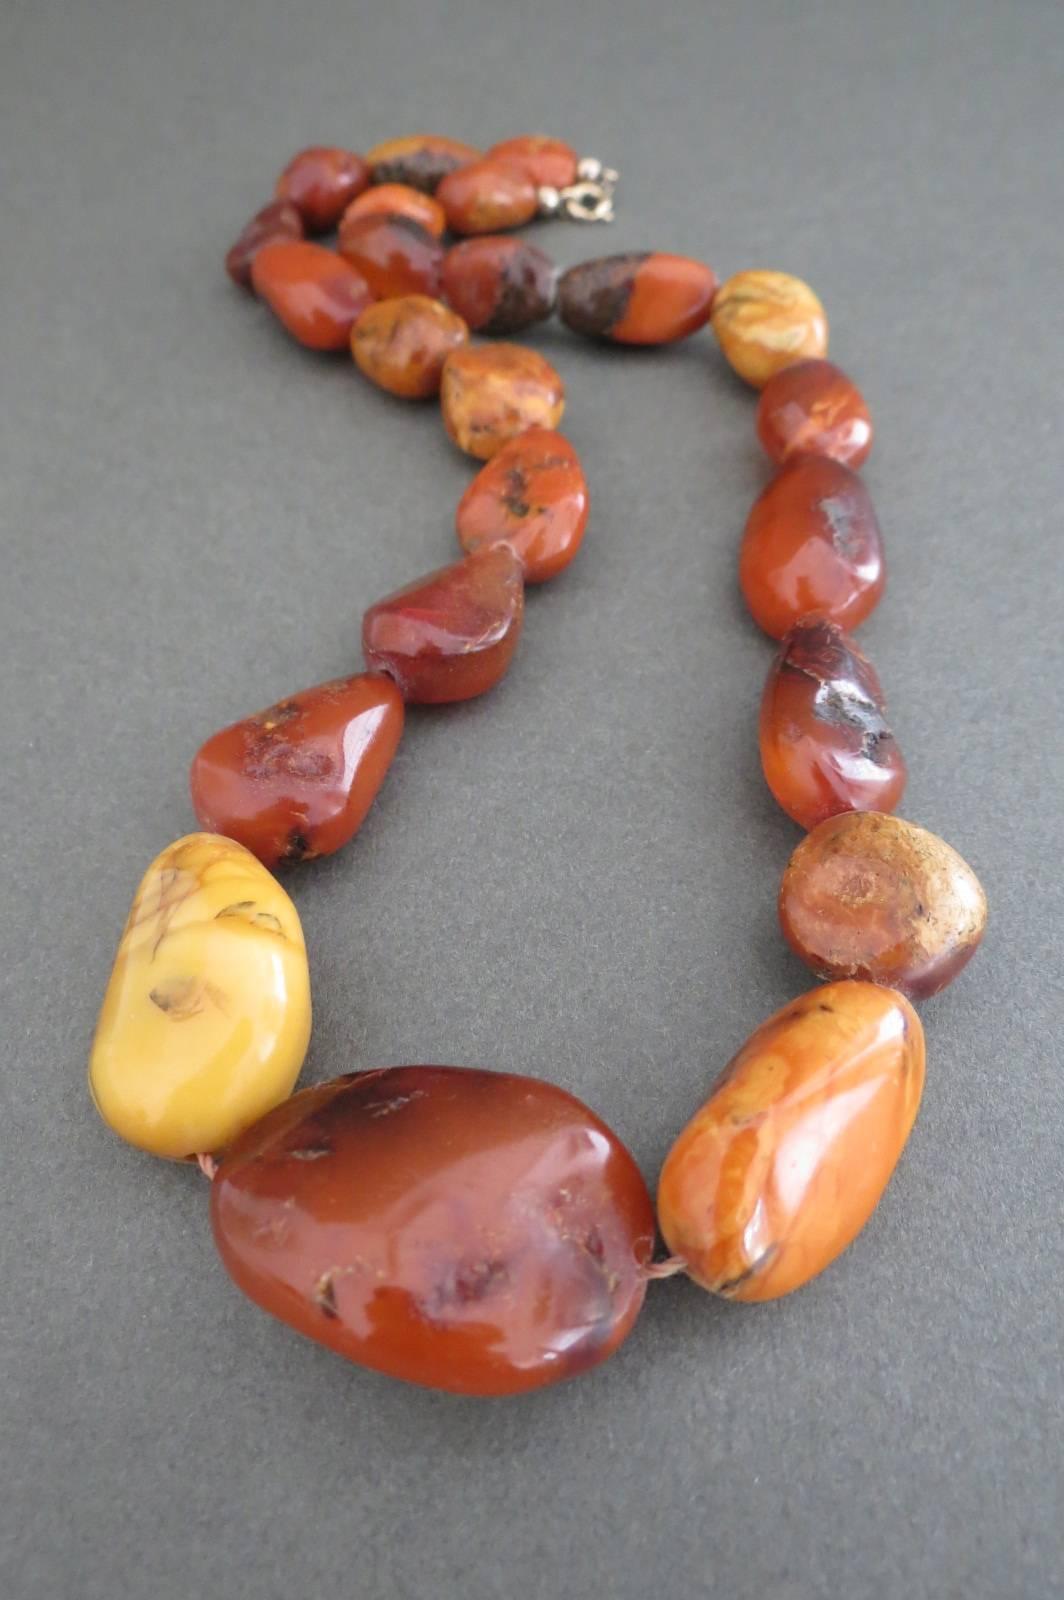 This is lovely natural baltic amber necklace and in good vintage condition. Amazing hand made beads and finished with vintage gilt clasp. Some natural imperefctions and small marks .
Item Specifics
Length: 47cm (approx 18.50